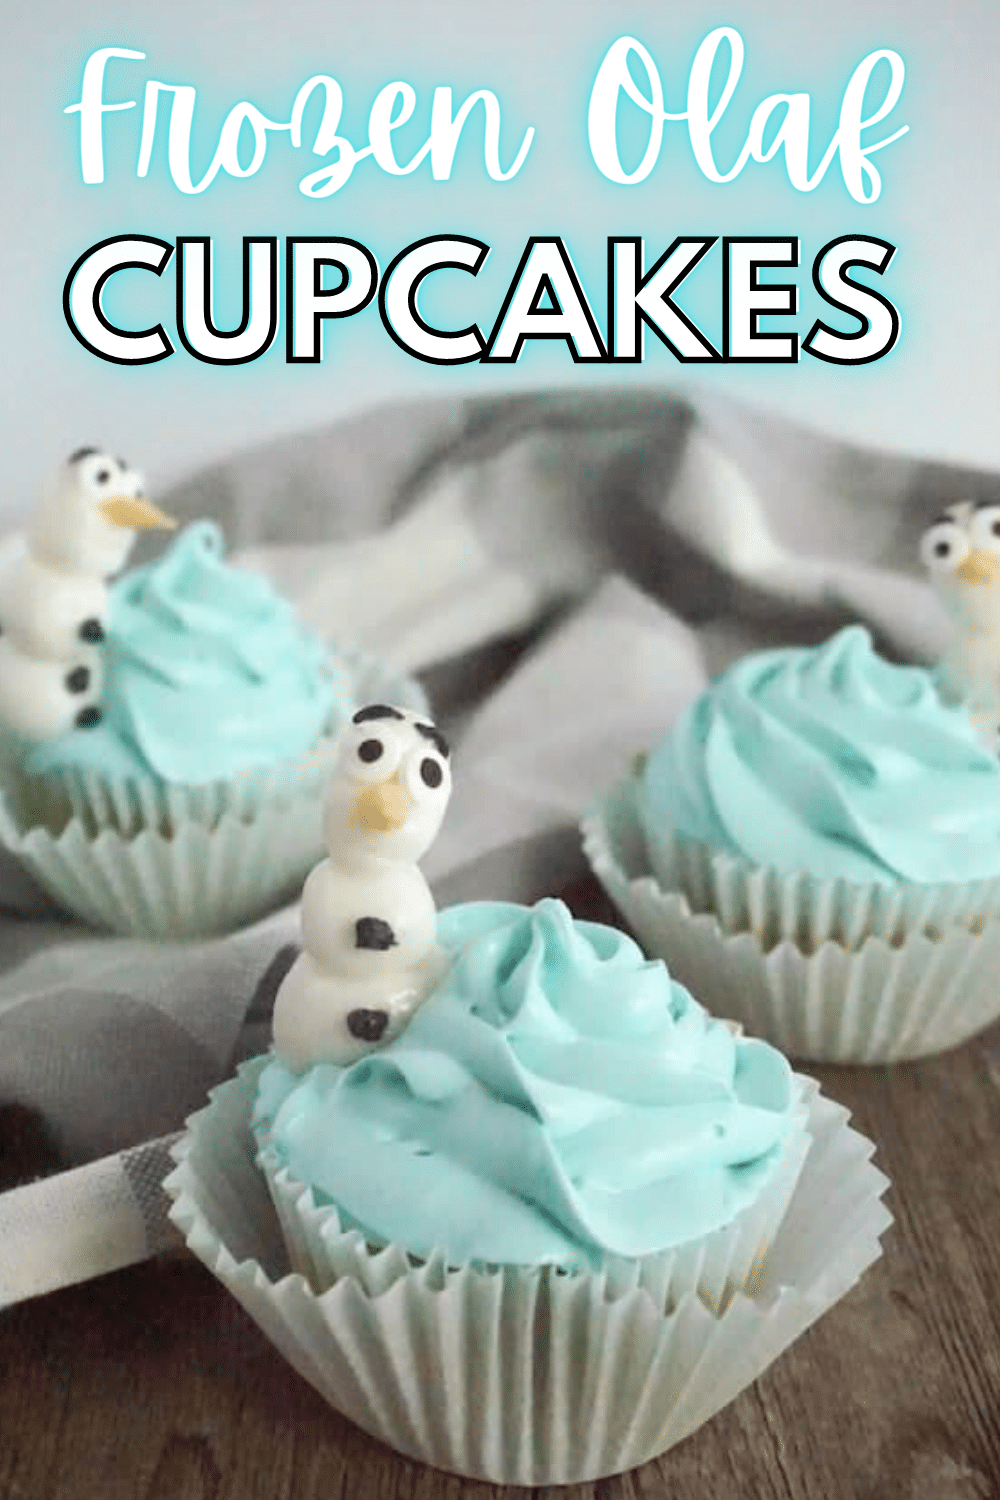 Easy and Fun FROZEN Olaf Cupcakes top with snowman (olaf) with a title text reading Frozen Olaf Cupcakes